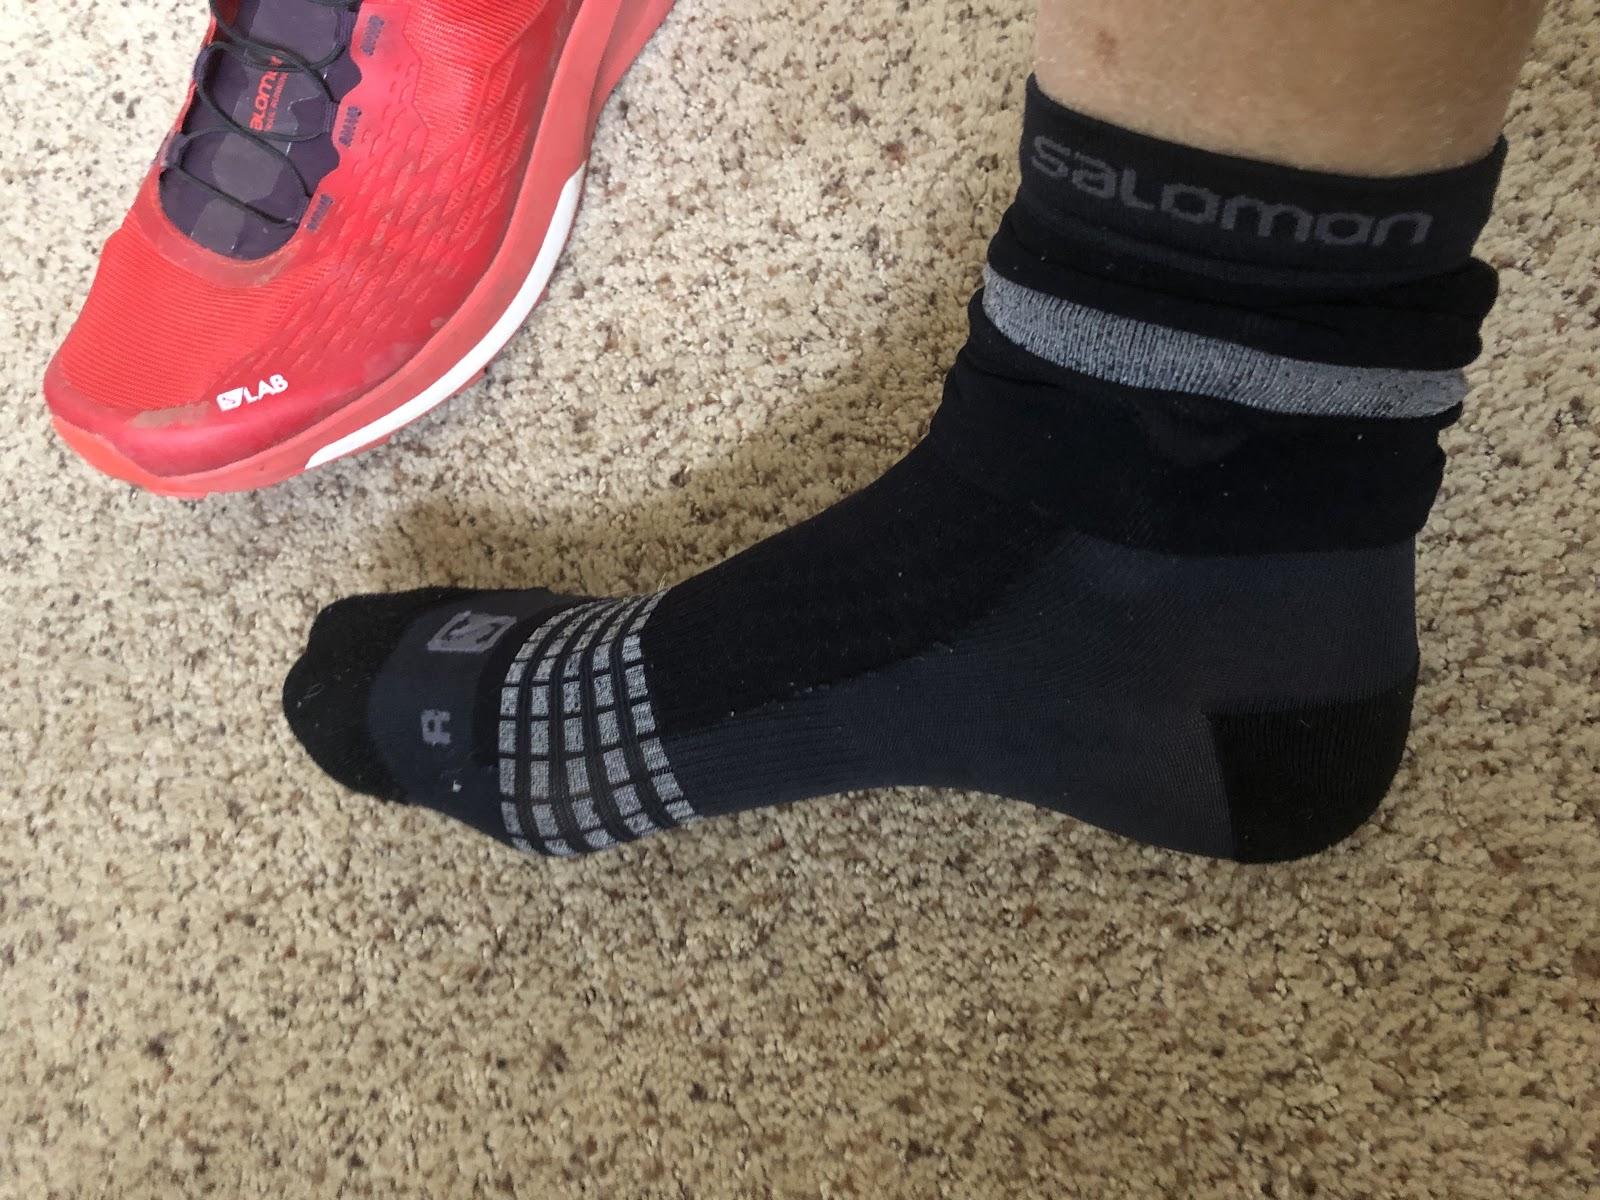 Road Trail Run: Socks Review: Introducing a wide range of technically advanced socks for running, hiking, and skiing,